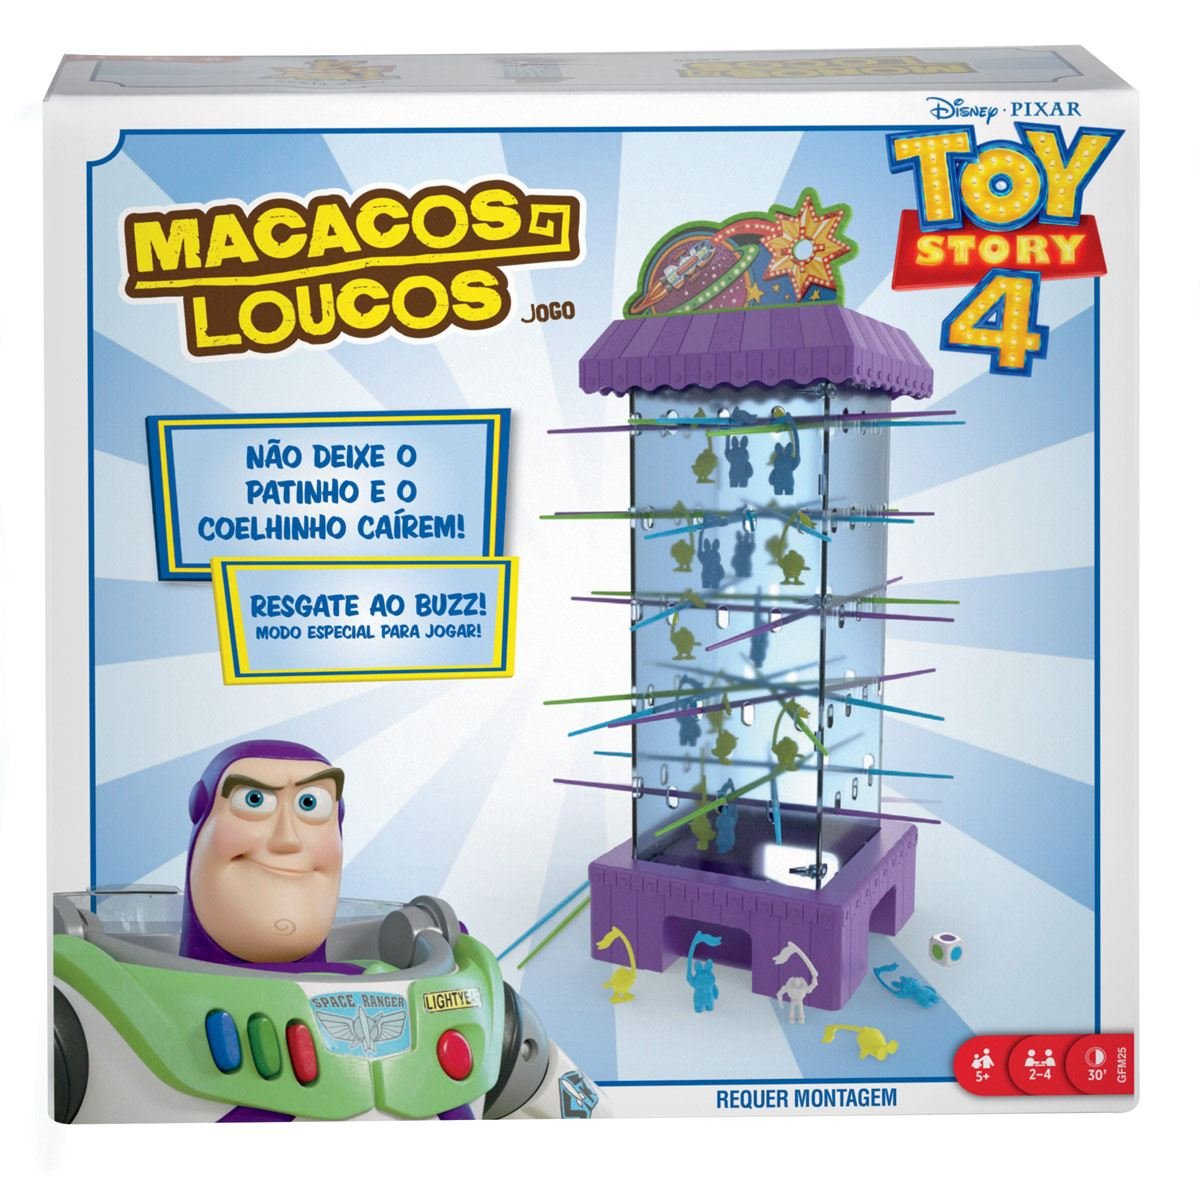 Macacos Locos Toy Story Games